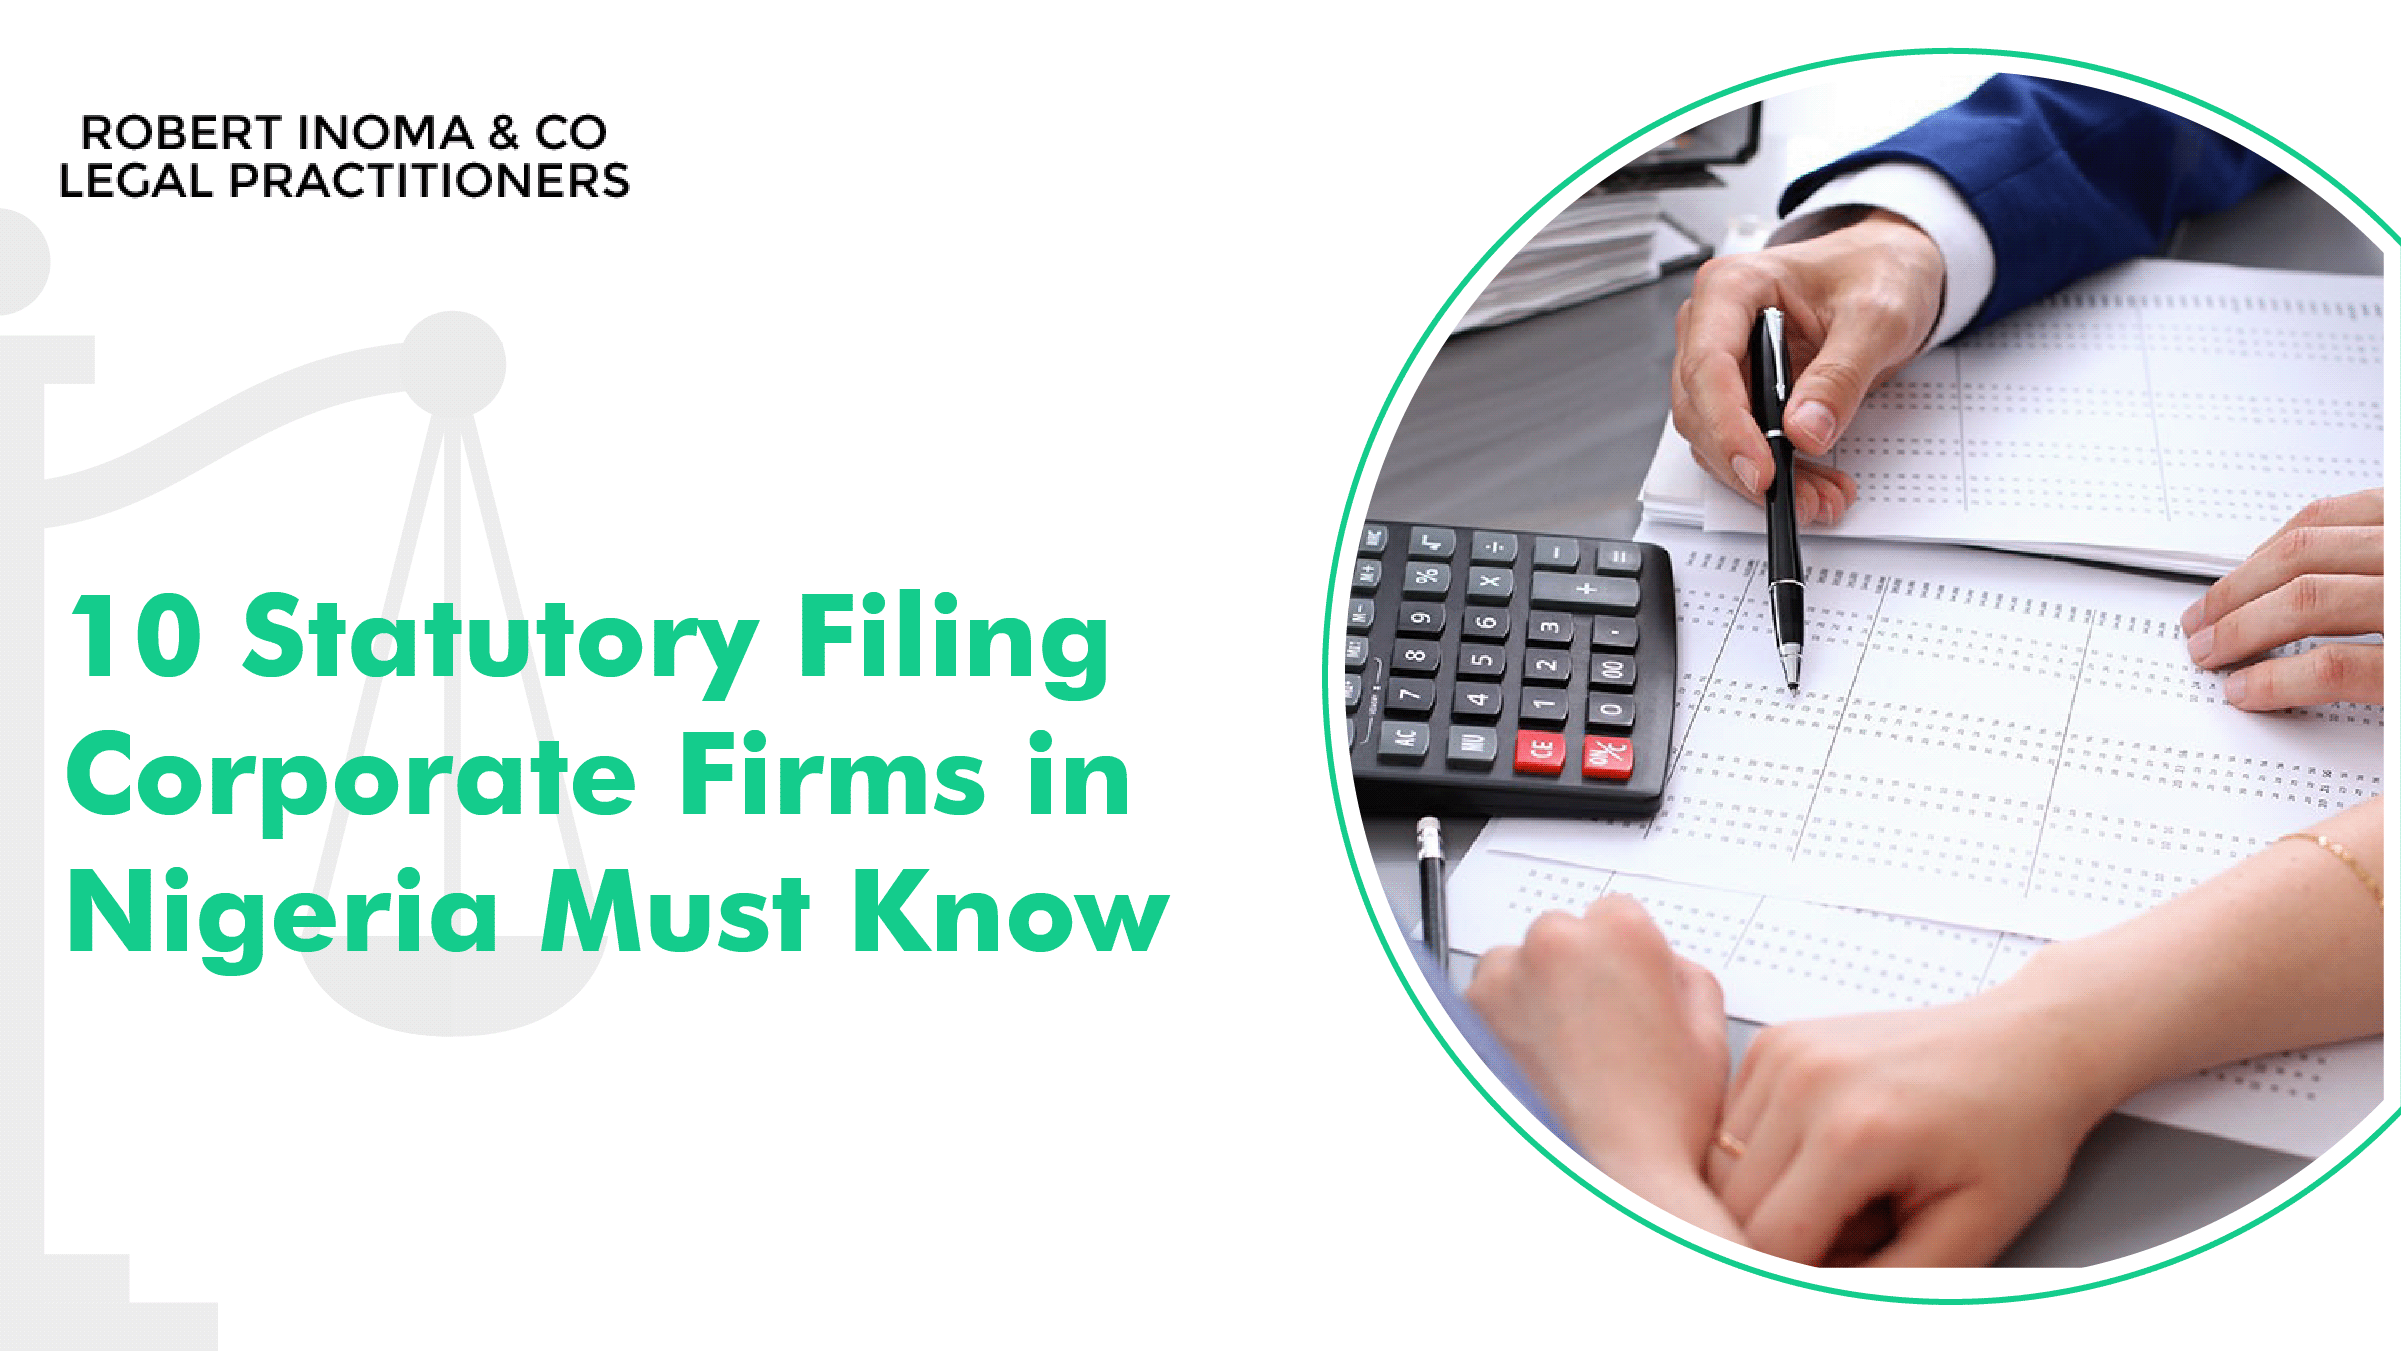 10 Statutory Filing Corporate Firms in Nigeria Must Know